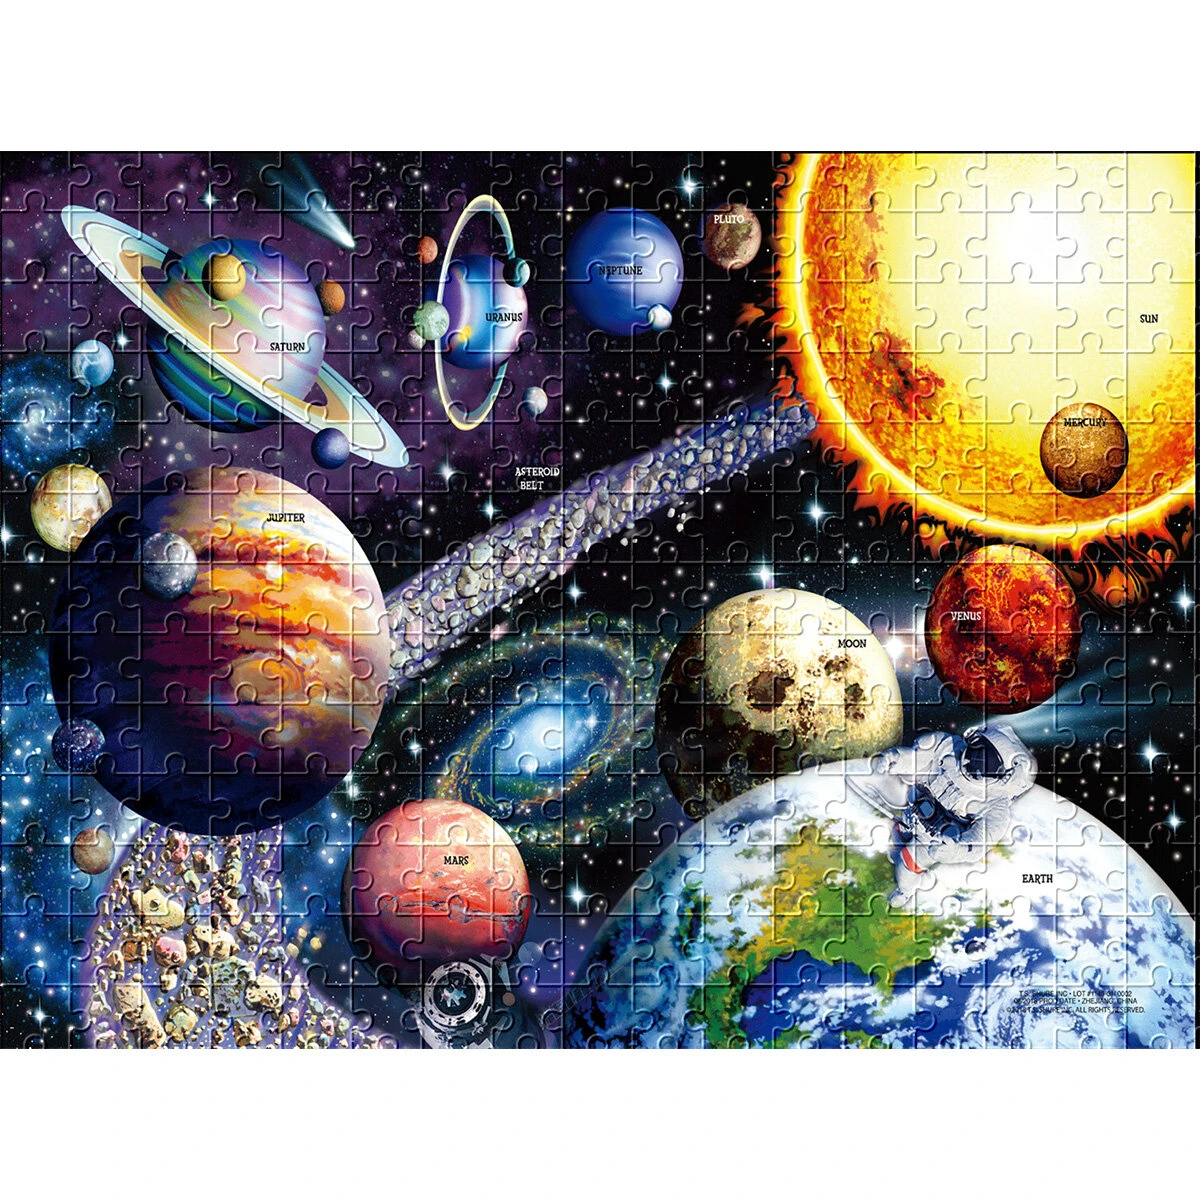 1000pcs jigsaw puzzles space puzzles solar system planets puzzles cosmic galaxy puzzles fun family game toy gifts for adults kids